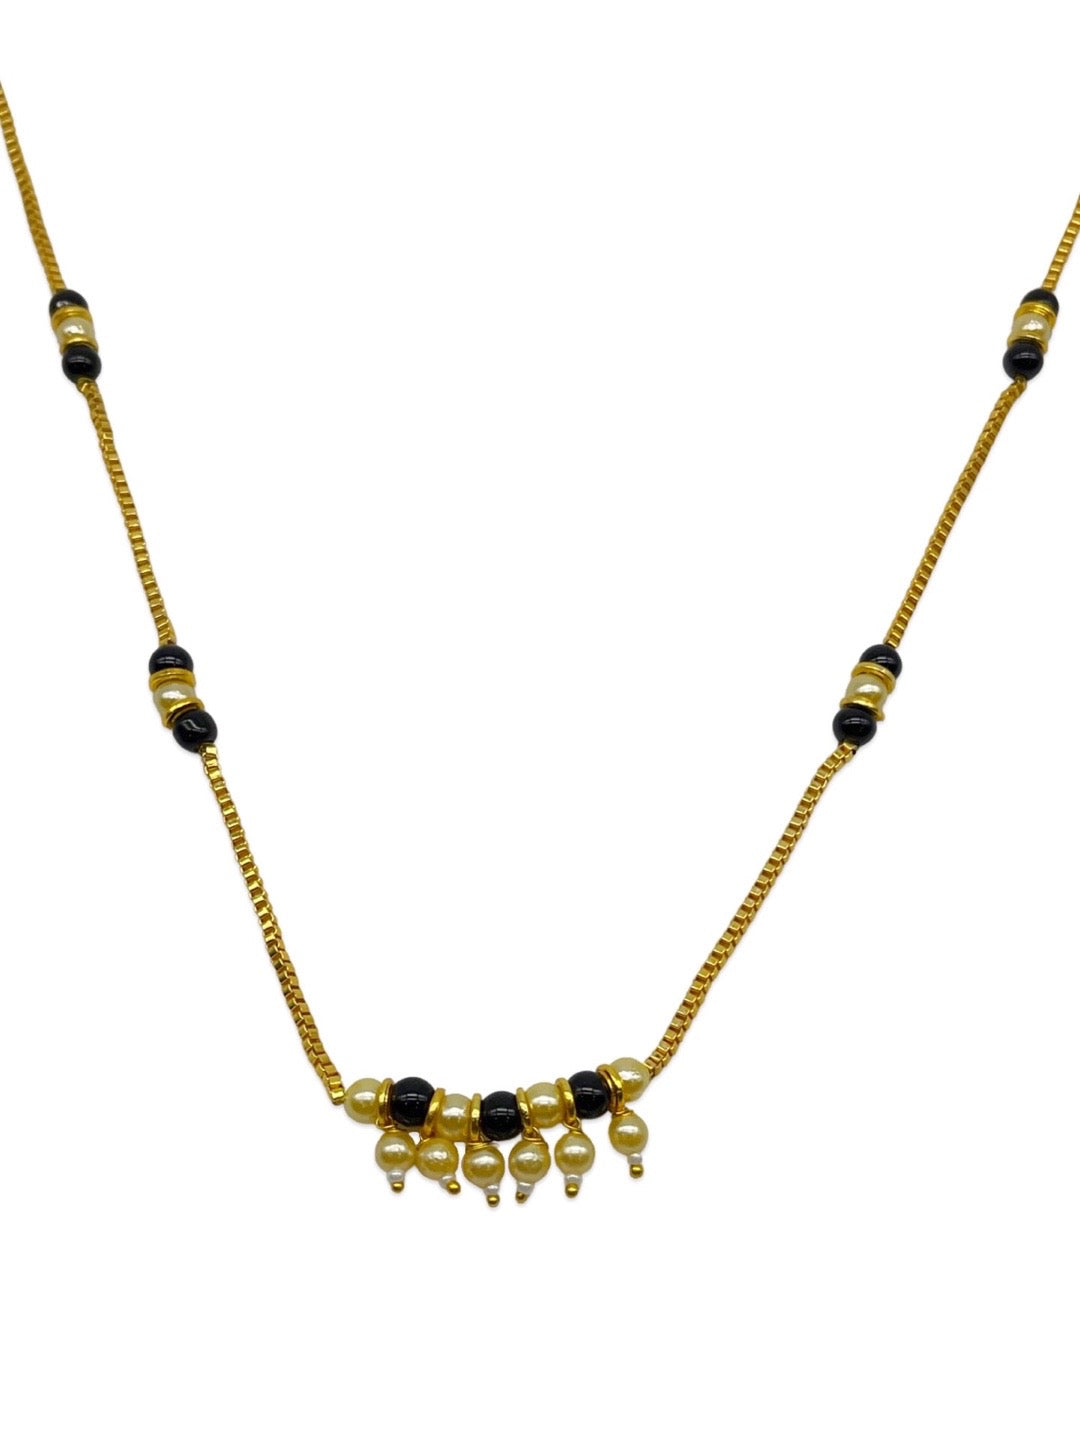 South Indian Long Mangalsutra Designs White Pearls Pendant Black Beads Gold Chain